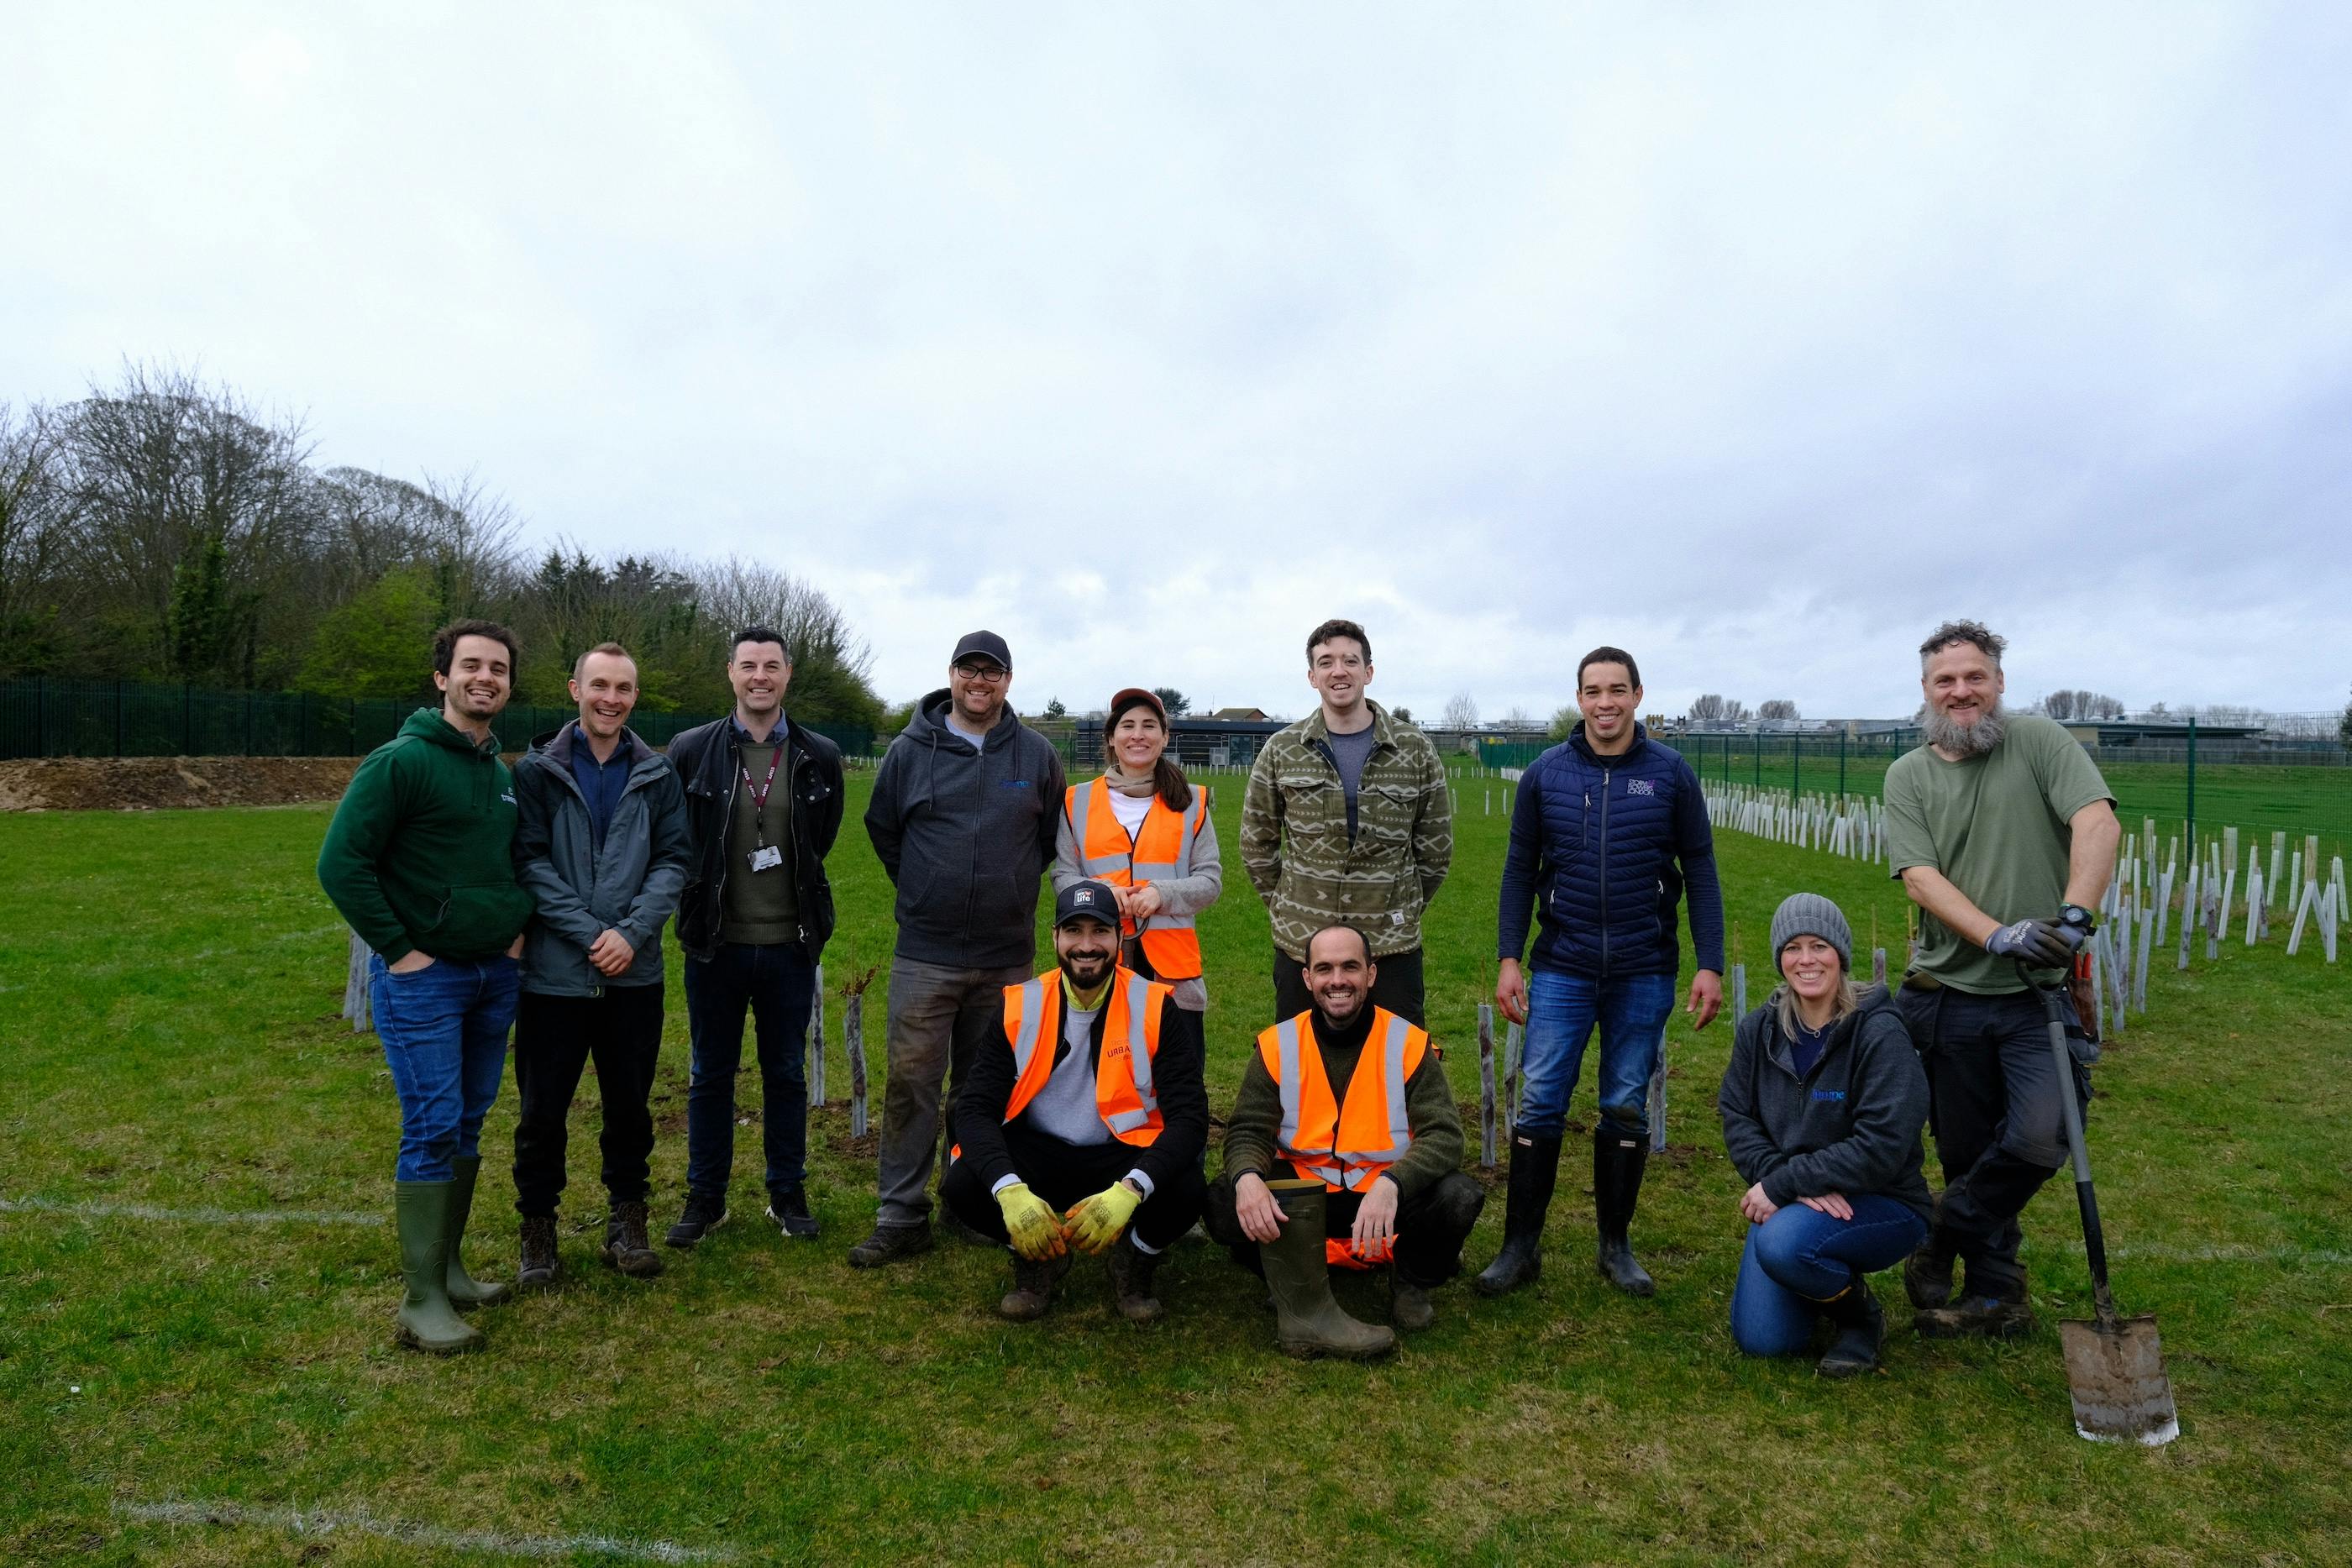 Juniper Studio and Treeapp planting group at the end of the day creating new woodland